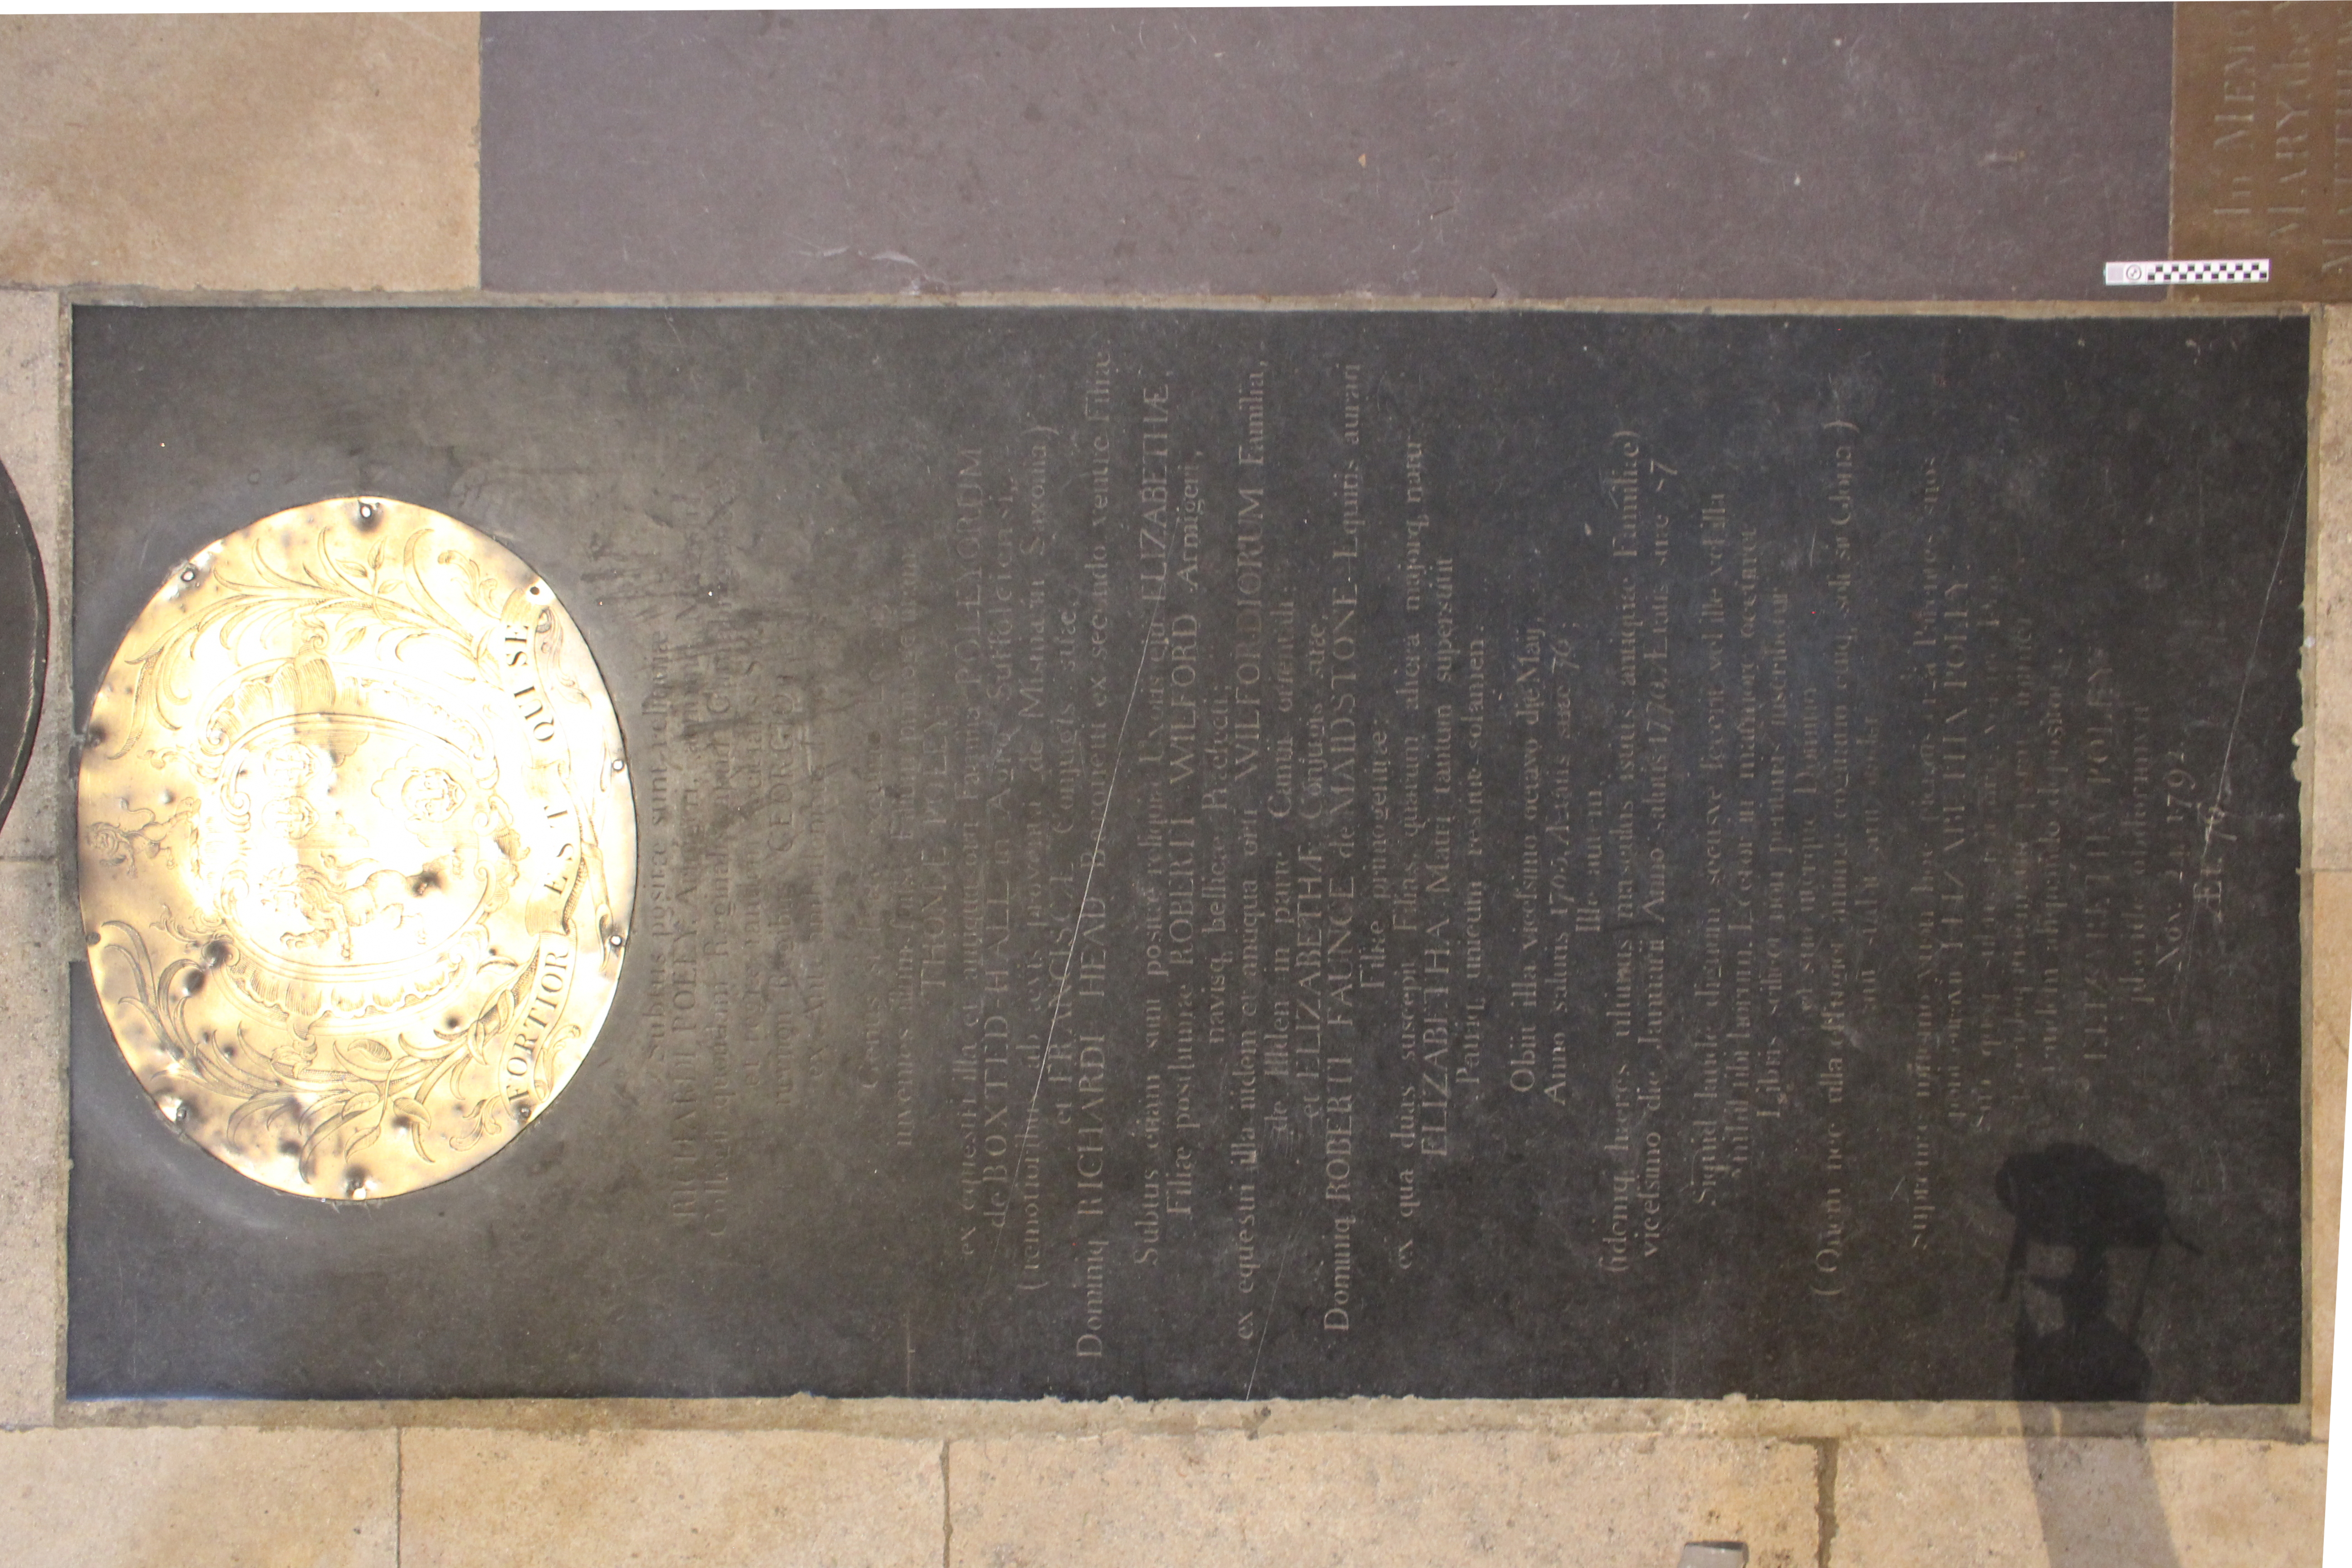 Photograph of the Poley family ledger stone in the north nave transept.